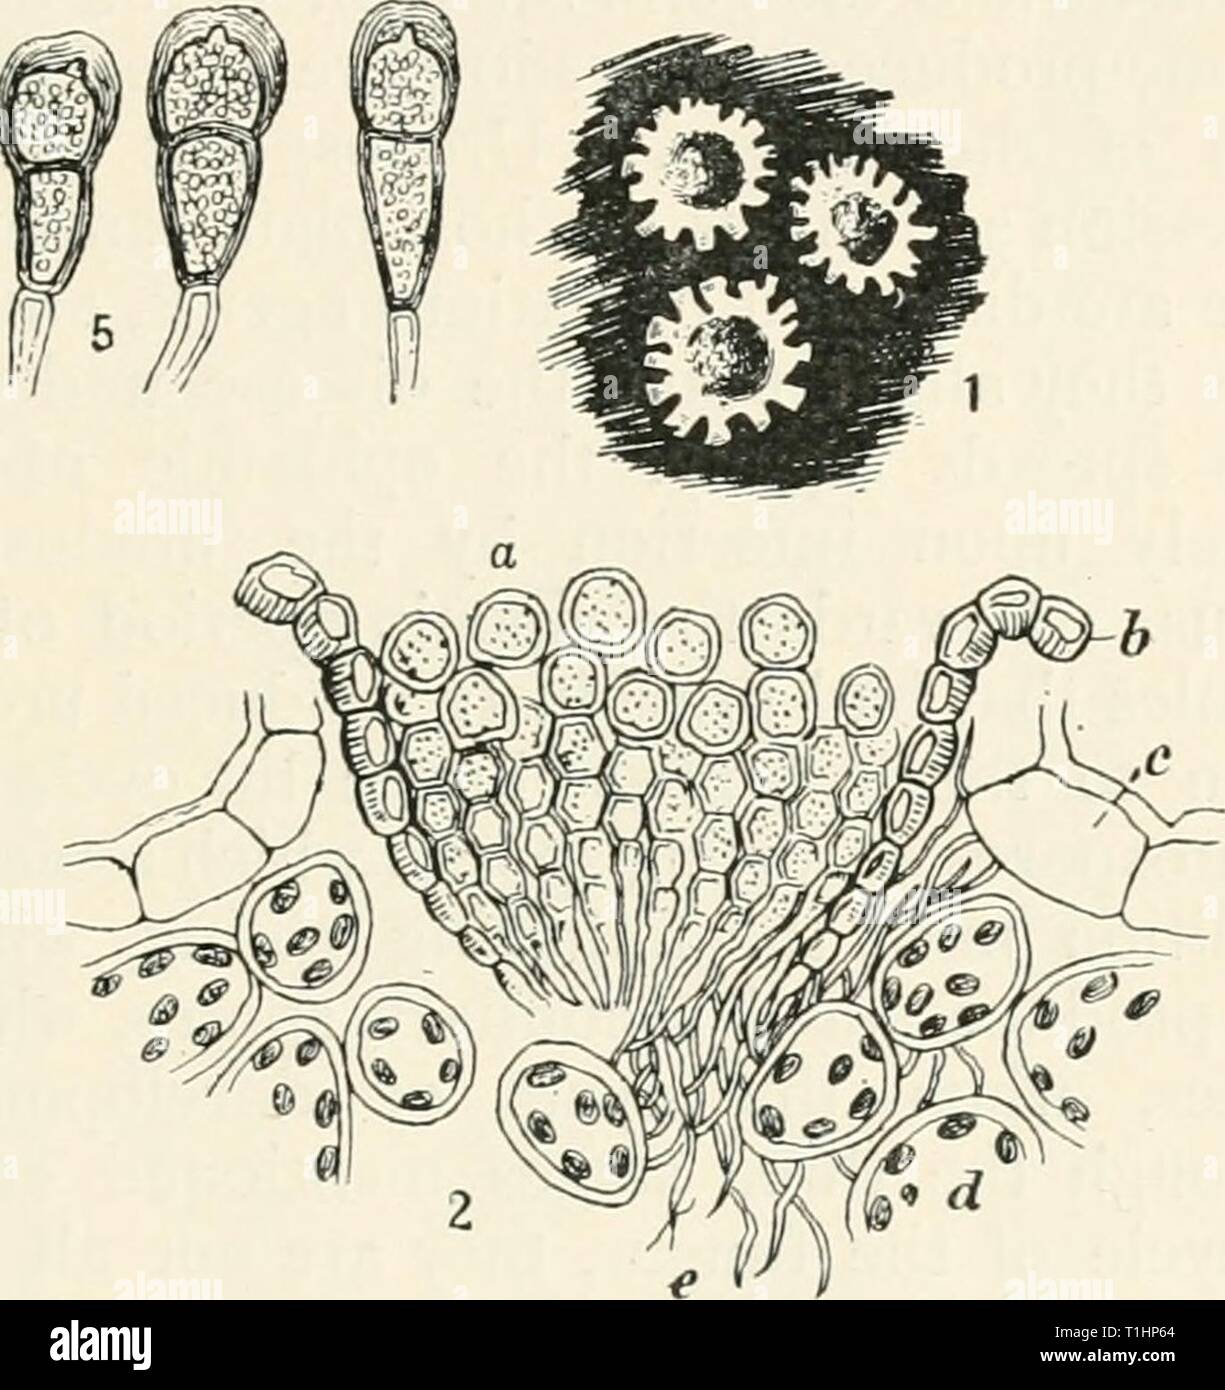 Diseases of cultivated plants and Diseases of cultivated plants and trees  diseasesofcultiv00massuoft Year: [1910?]  Fig. 88.—Puccinia pringshcimiana. i, portion of gooseberry leaf with three aecidia or ' cluster-cups ' ; 2, section through a ' cluster-cup'; a, spores produced in chains; b, wall or peridium ; c, epidermis of host; rf, middle cells of leaf; e, mycelium of fungus ; 3, portion of sedge leaf bearing sori of teleutospores ; 4, portion of same ; 5, teleutospores. 6, uredo- spores. Fig. i nat. size, and remainder variously mag. thickened, roundish or truncate, base often narrowed, sm Stock Photo